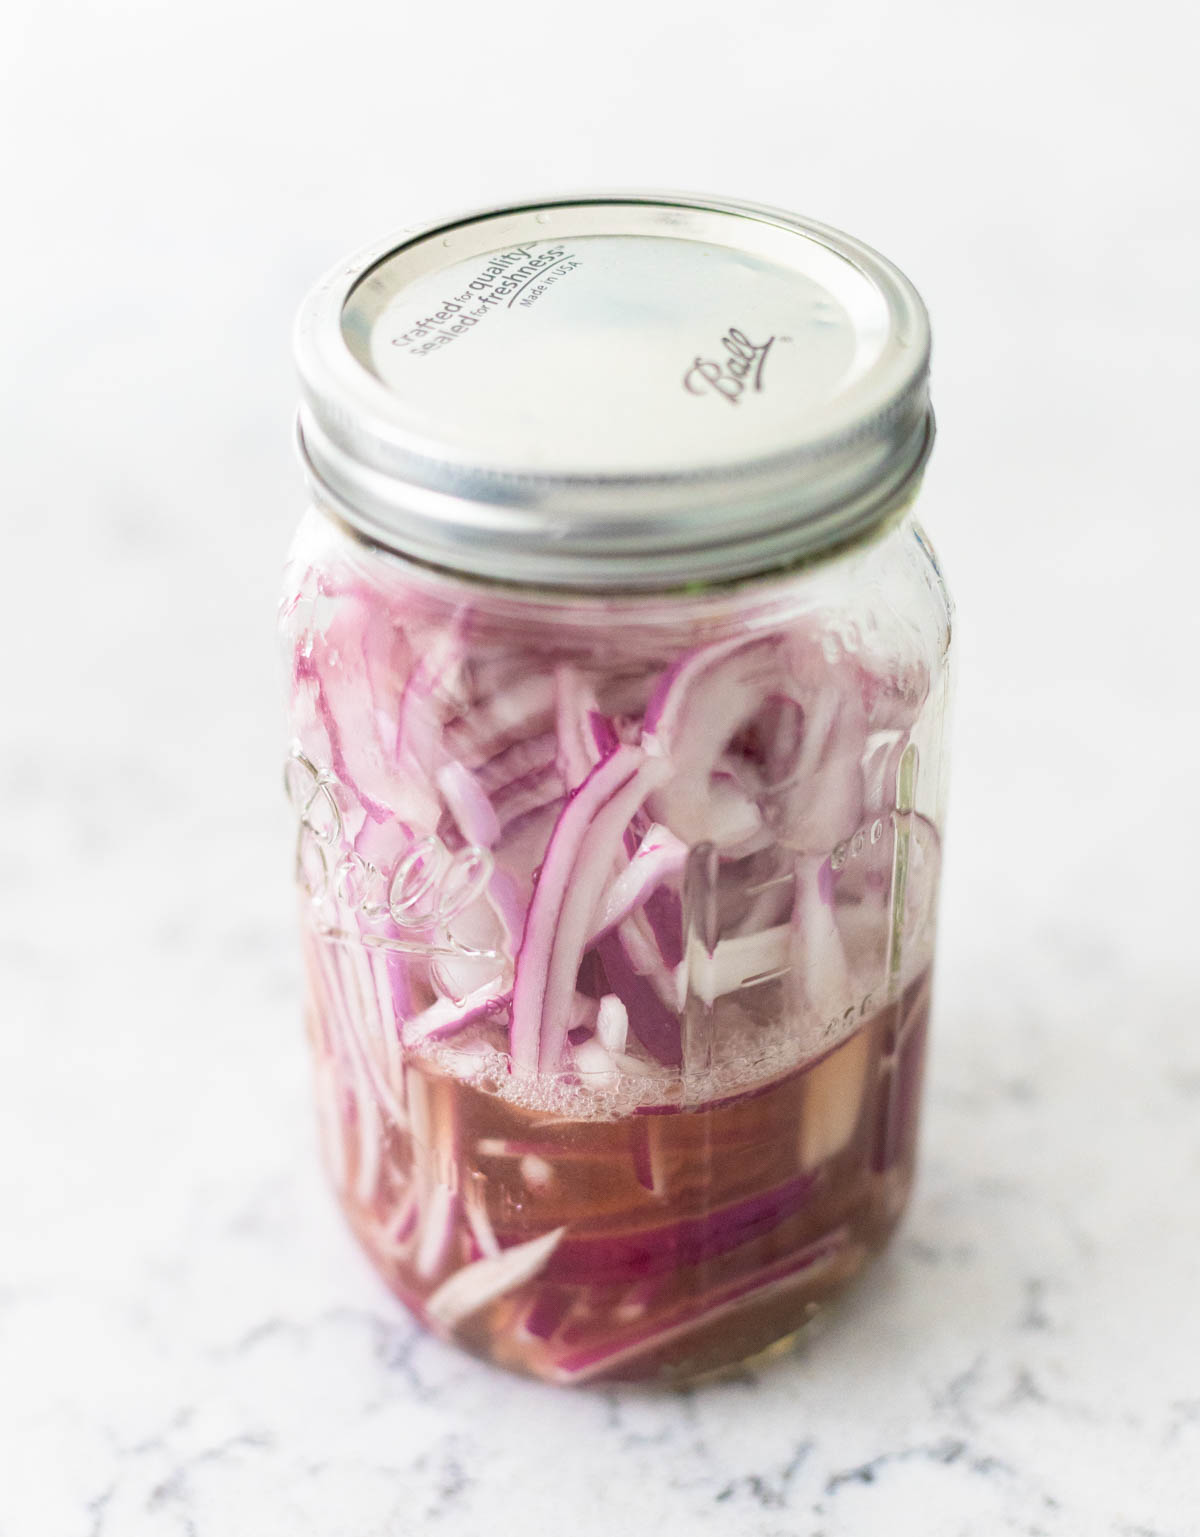 The sliced red onions are in a large mason jar.